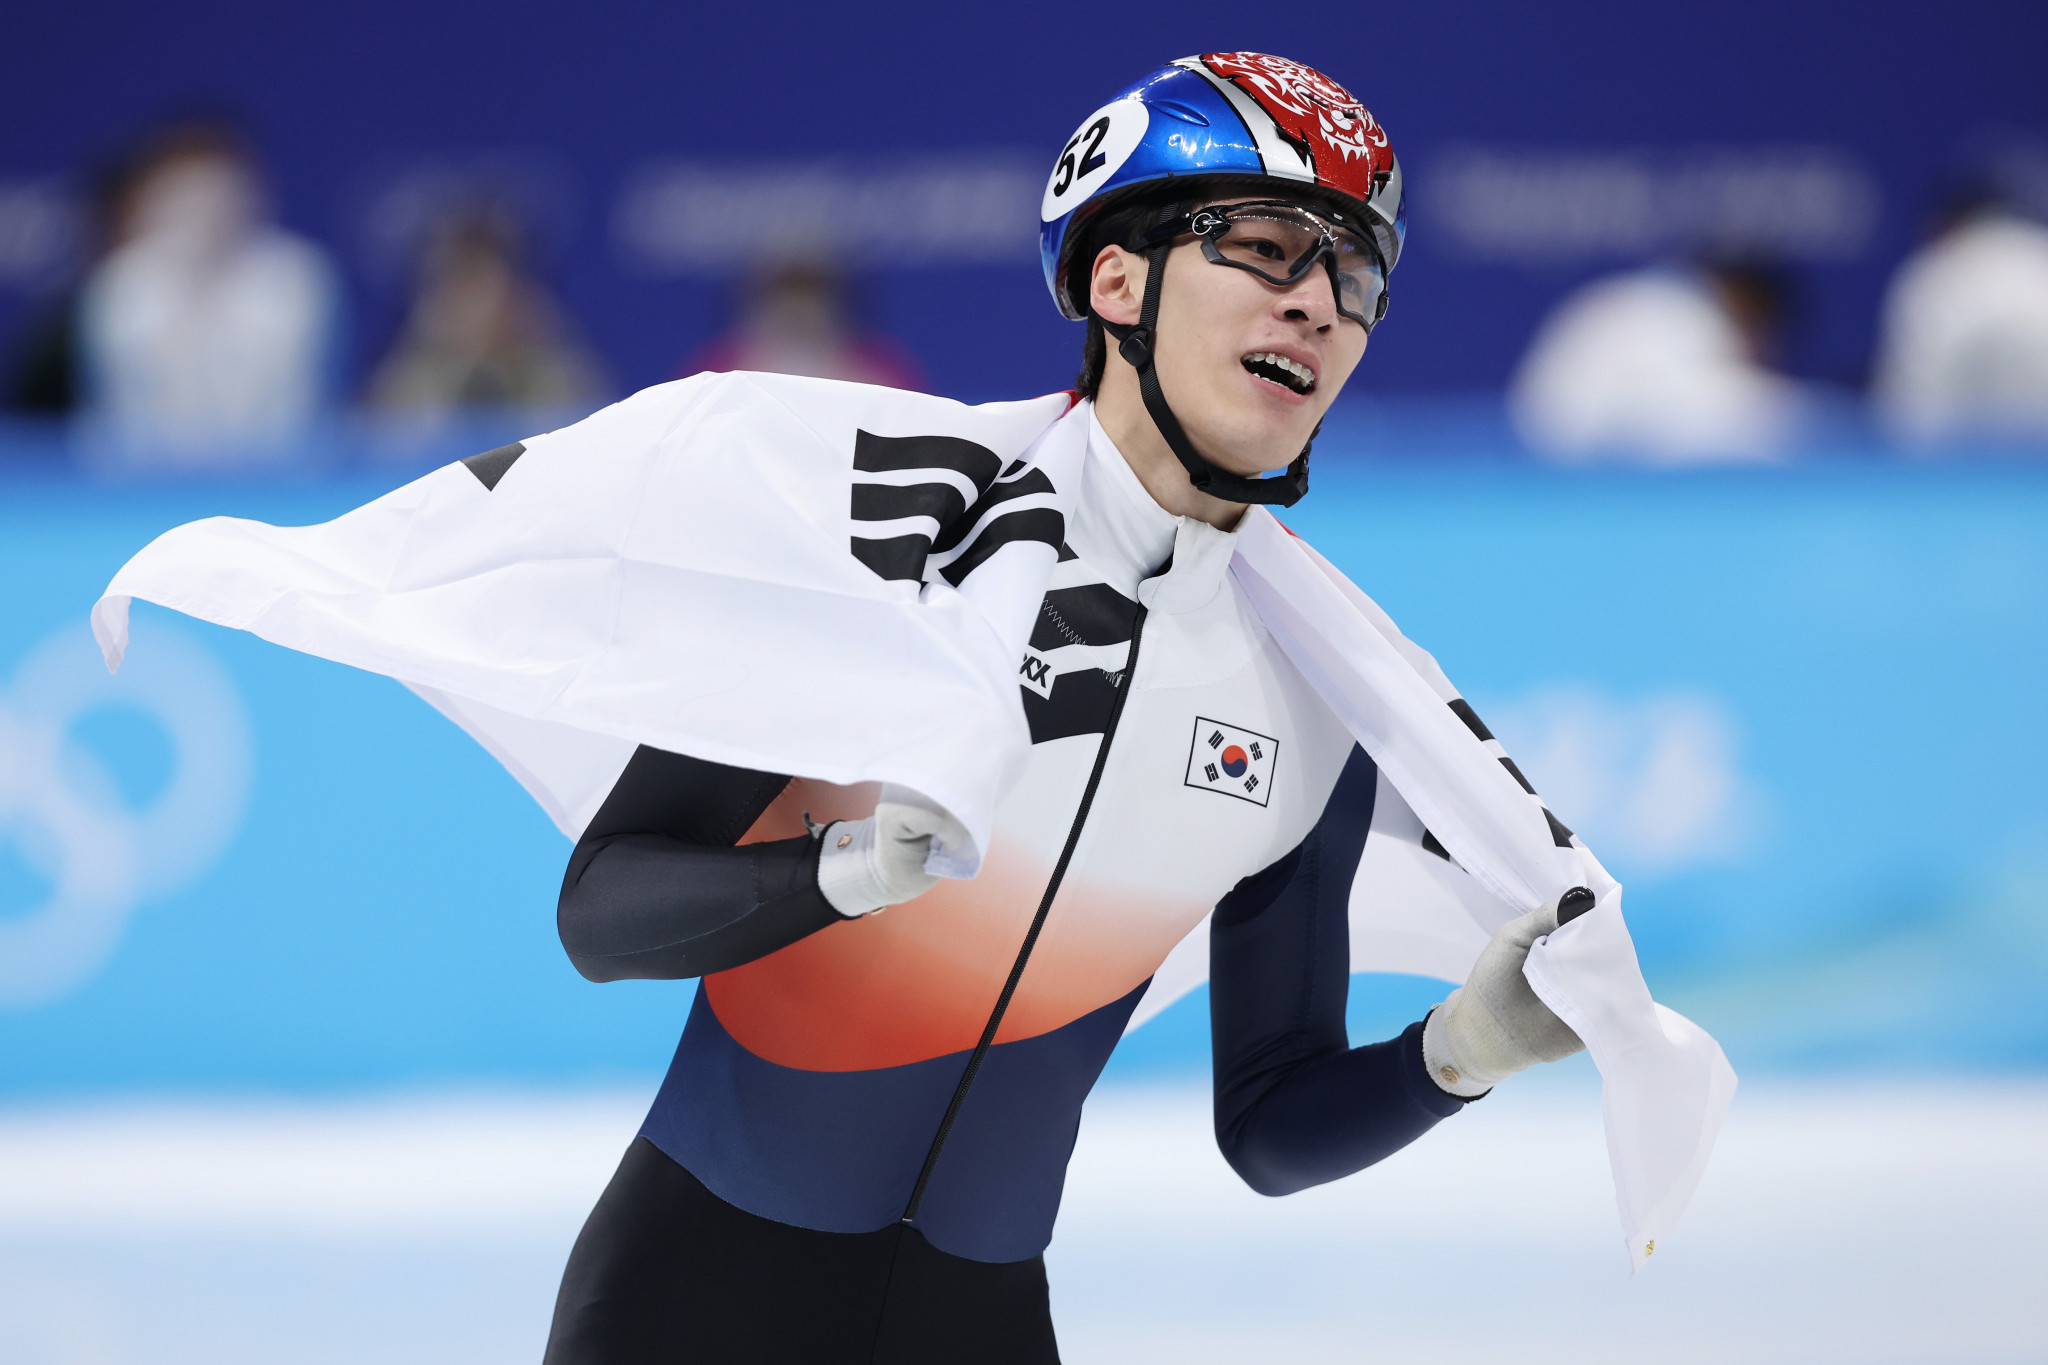 Hwang Dae-heon secured South Korea's first gold medal of Beijing 2022 ©Getty Images